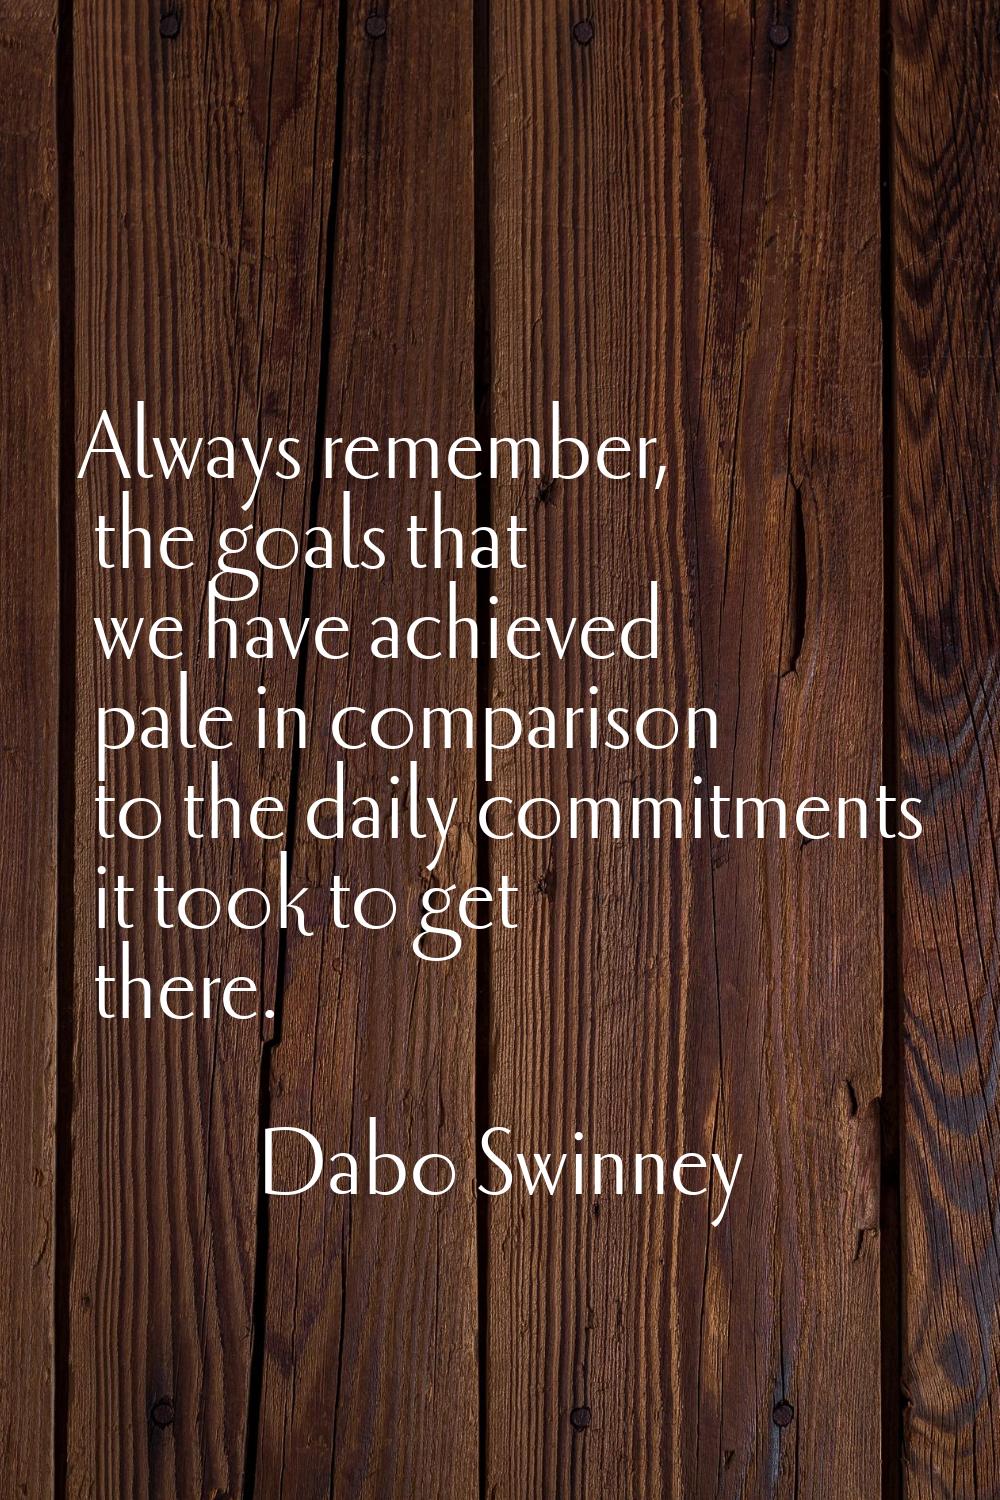 Always remember, the goals that we have achieved pale in comparison to the daily commitments it too